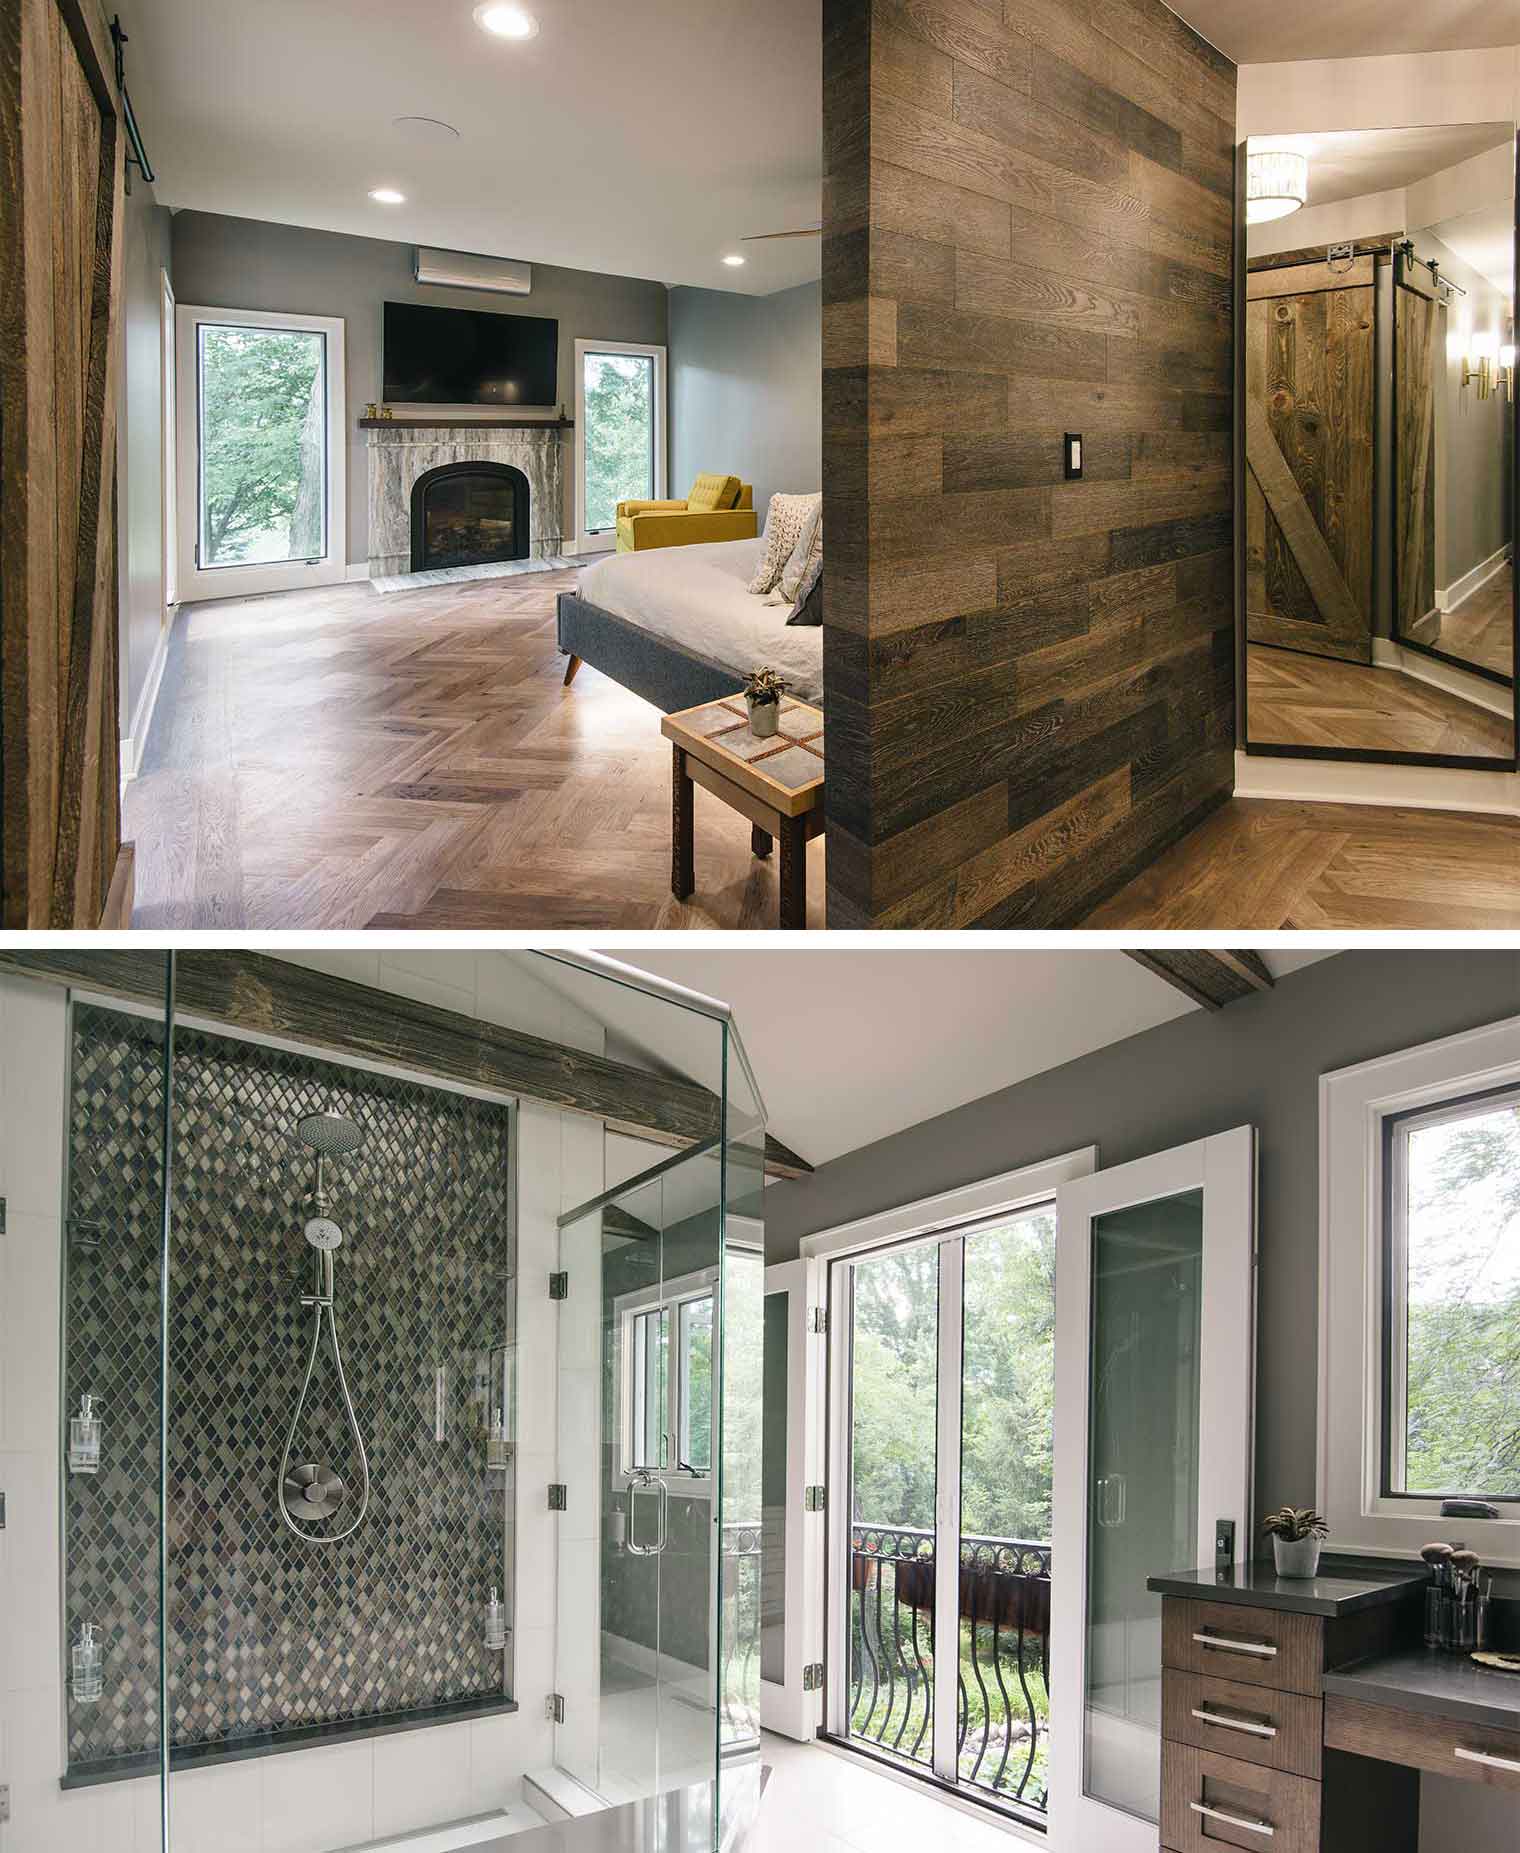 Contemporary master suite with three way mirror, stone fireplace, herringbone flooring, centrally located glass enclosed shower and Juliet balcony by designer Tyson Leyendecker of Silent Rivers, Des Moines, Iowa